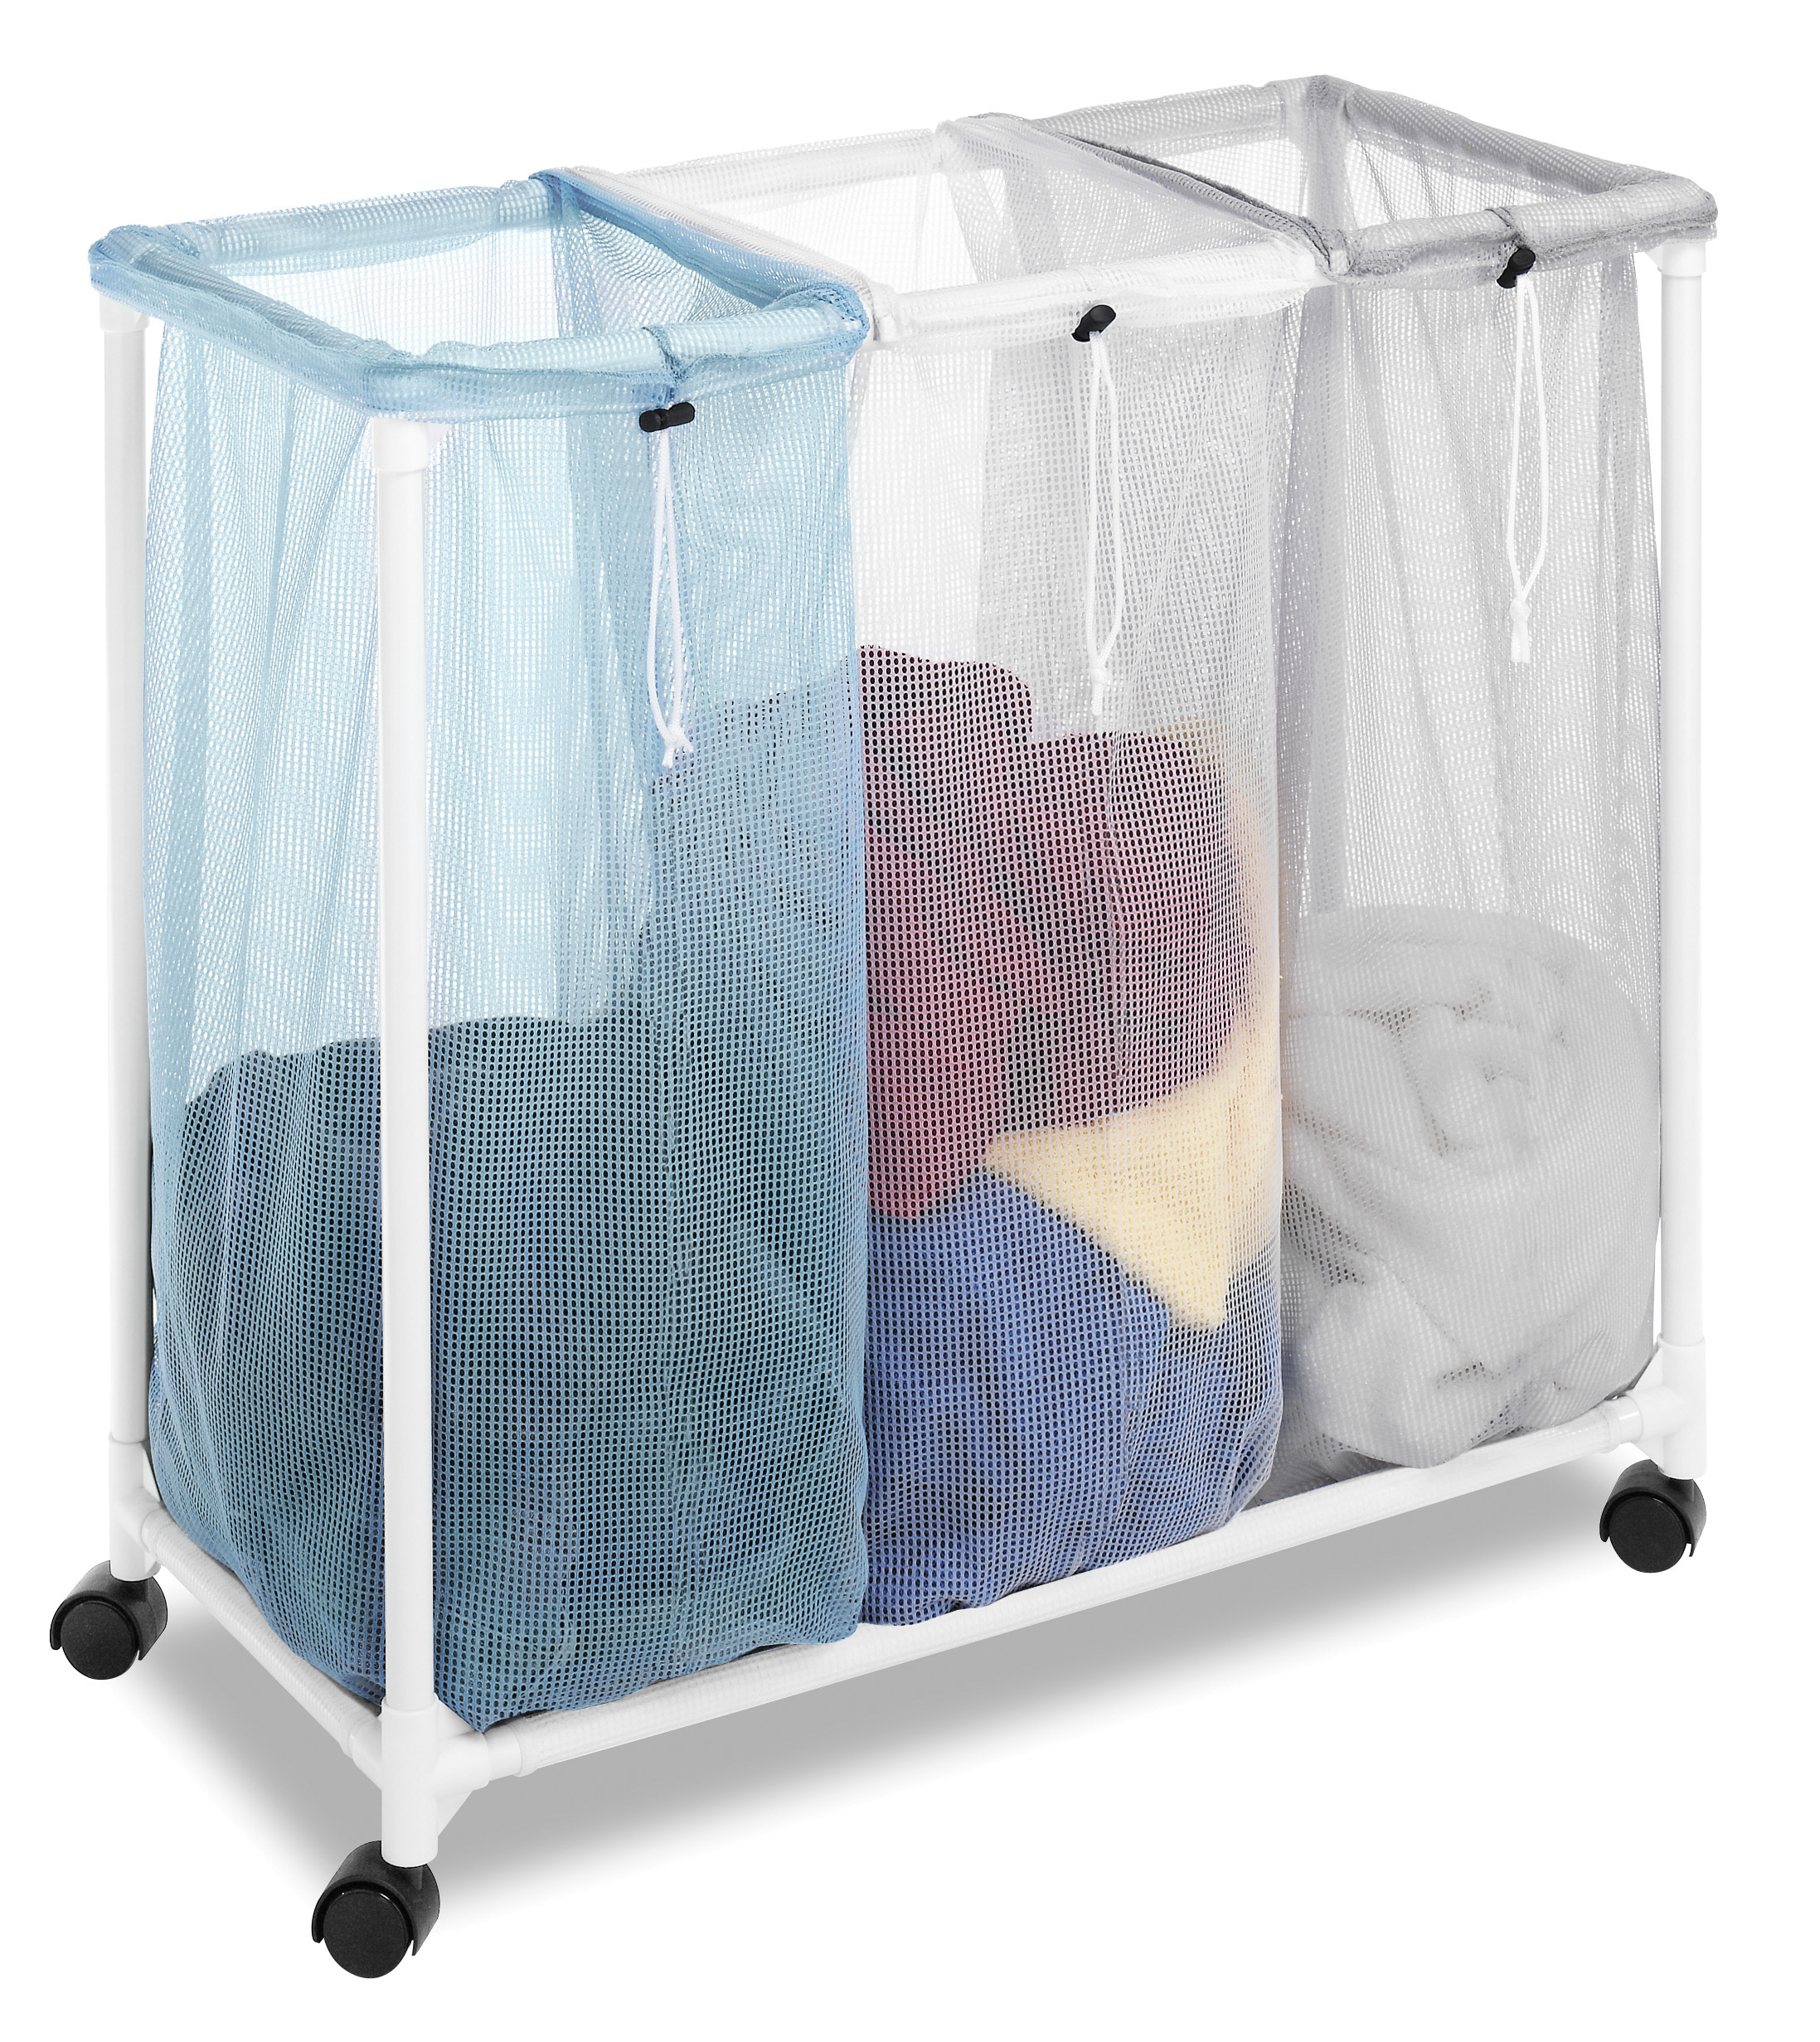 Whitmor Triple Mesh Bag Laundry Sorter, Clear and Blue - image 4 of 7